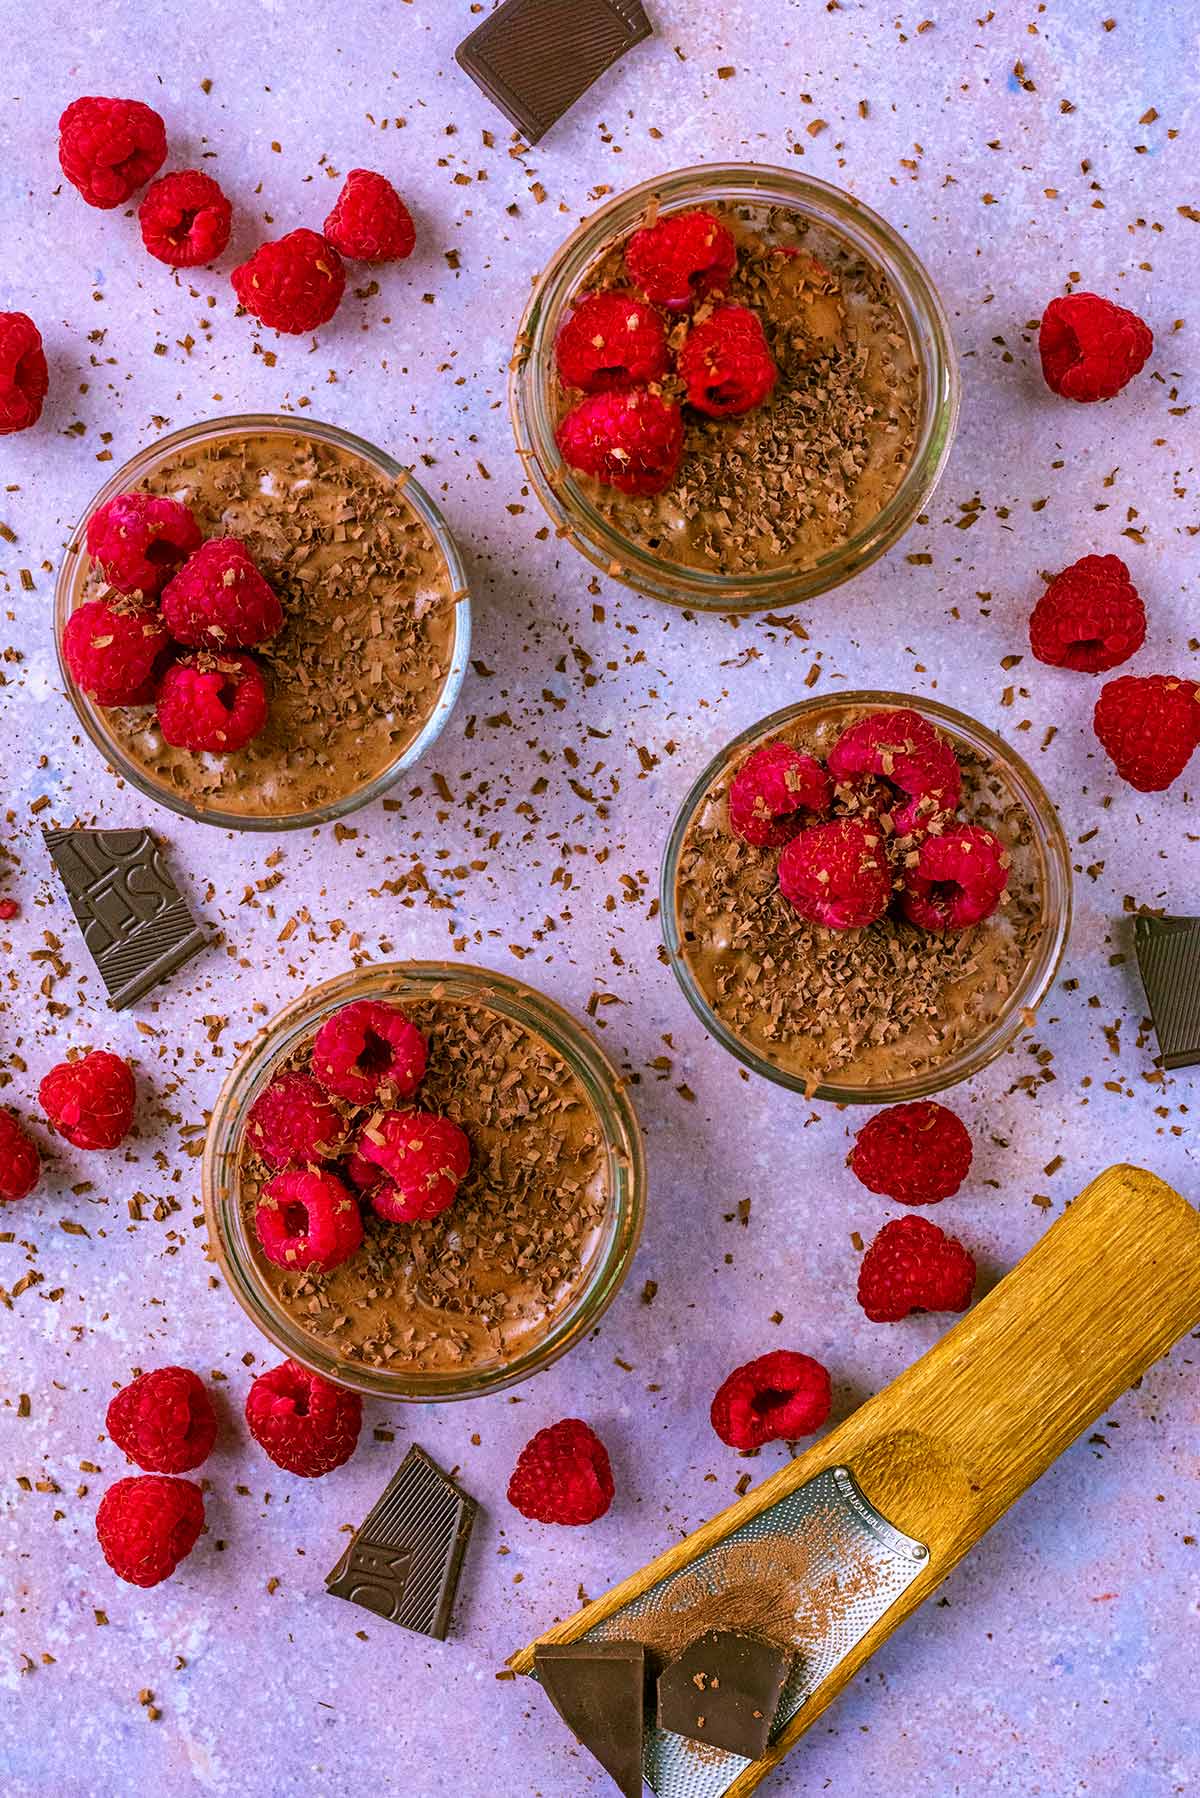 Four pots of chocolate mousse each topped with four raspberries.